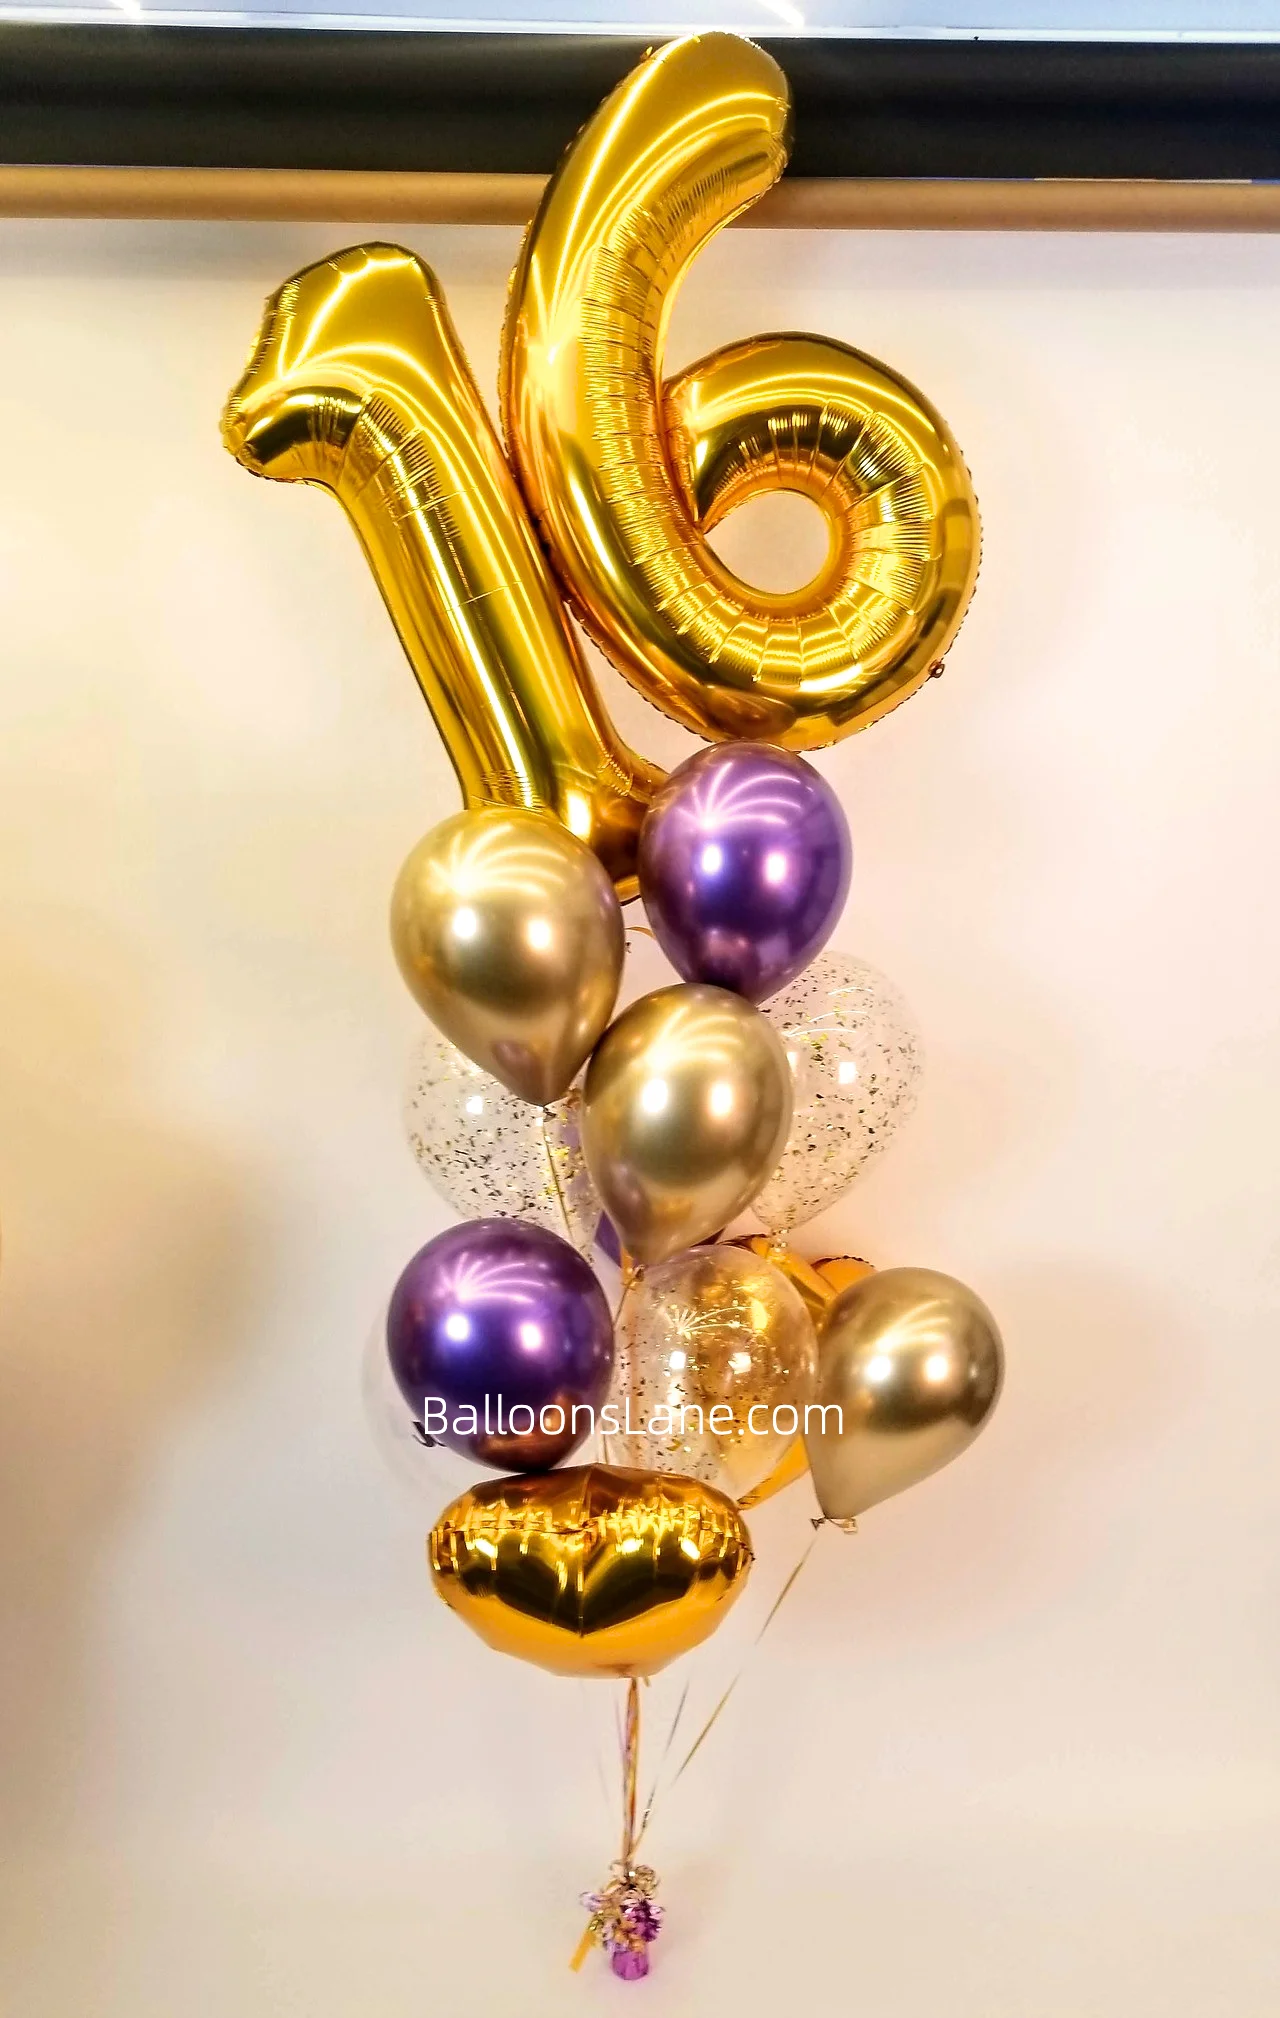 Large Number balloons 1 & 6 atop a bouquet arrangement featuring gold and purple latex balloons, a gold foil balloon, and gold confetti balloons to celebrate a birthday and anniversary in Manhattan.